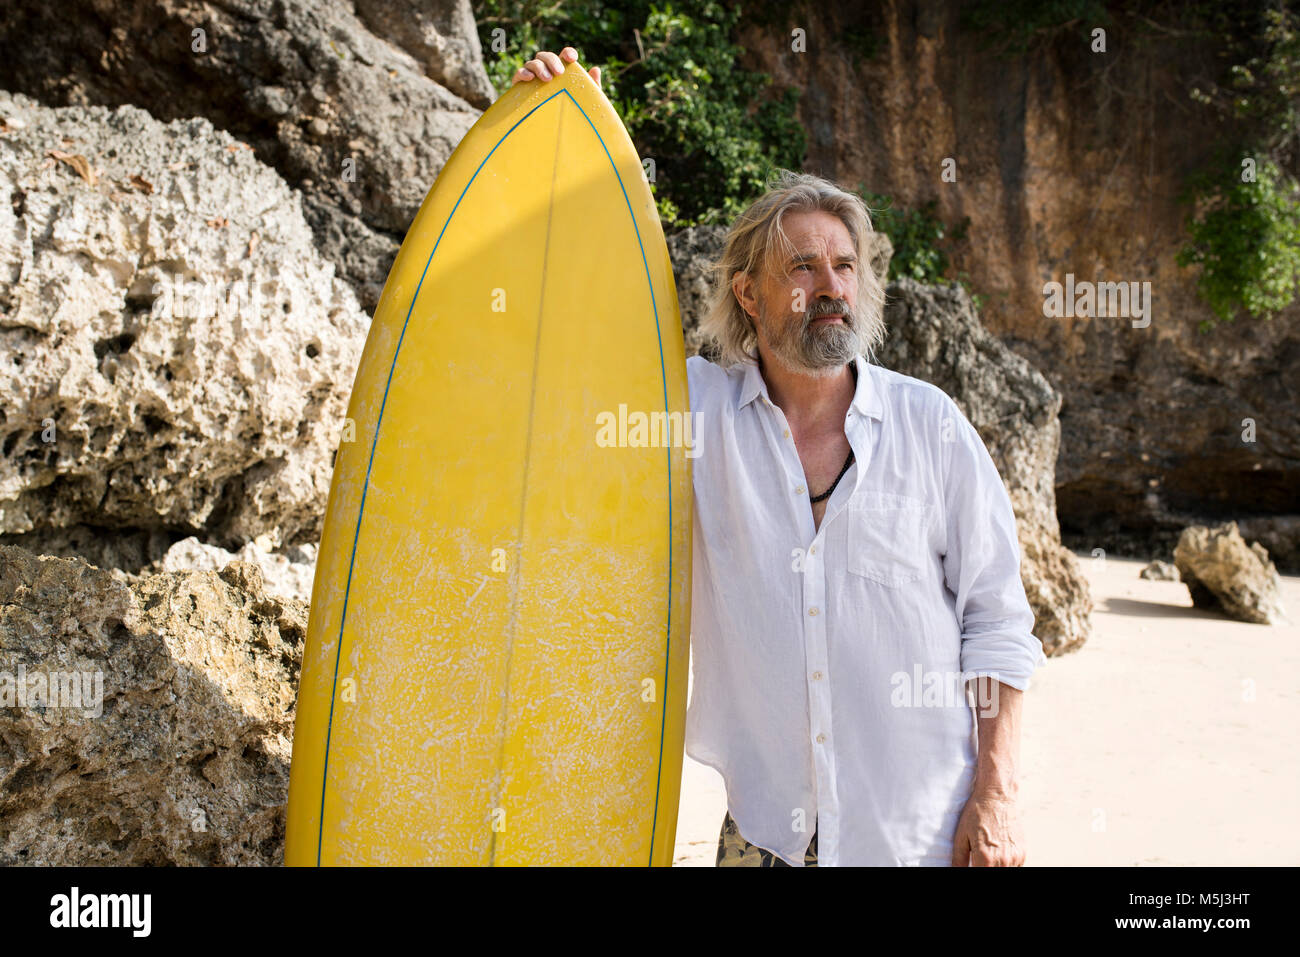 Romantic couple with surfboards at beach Banque D'Images